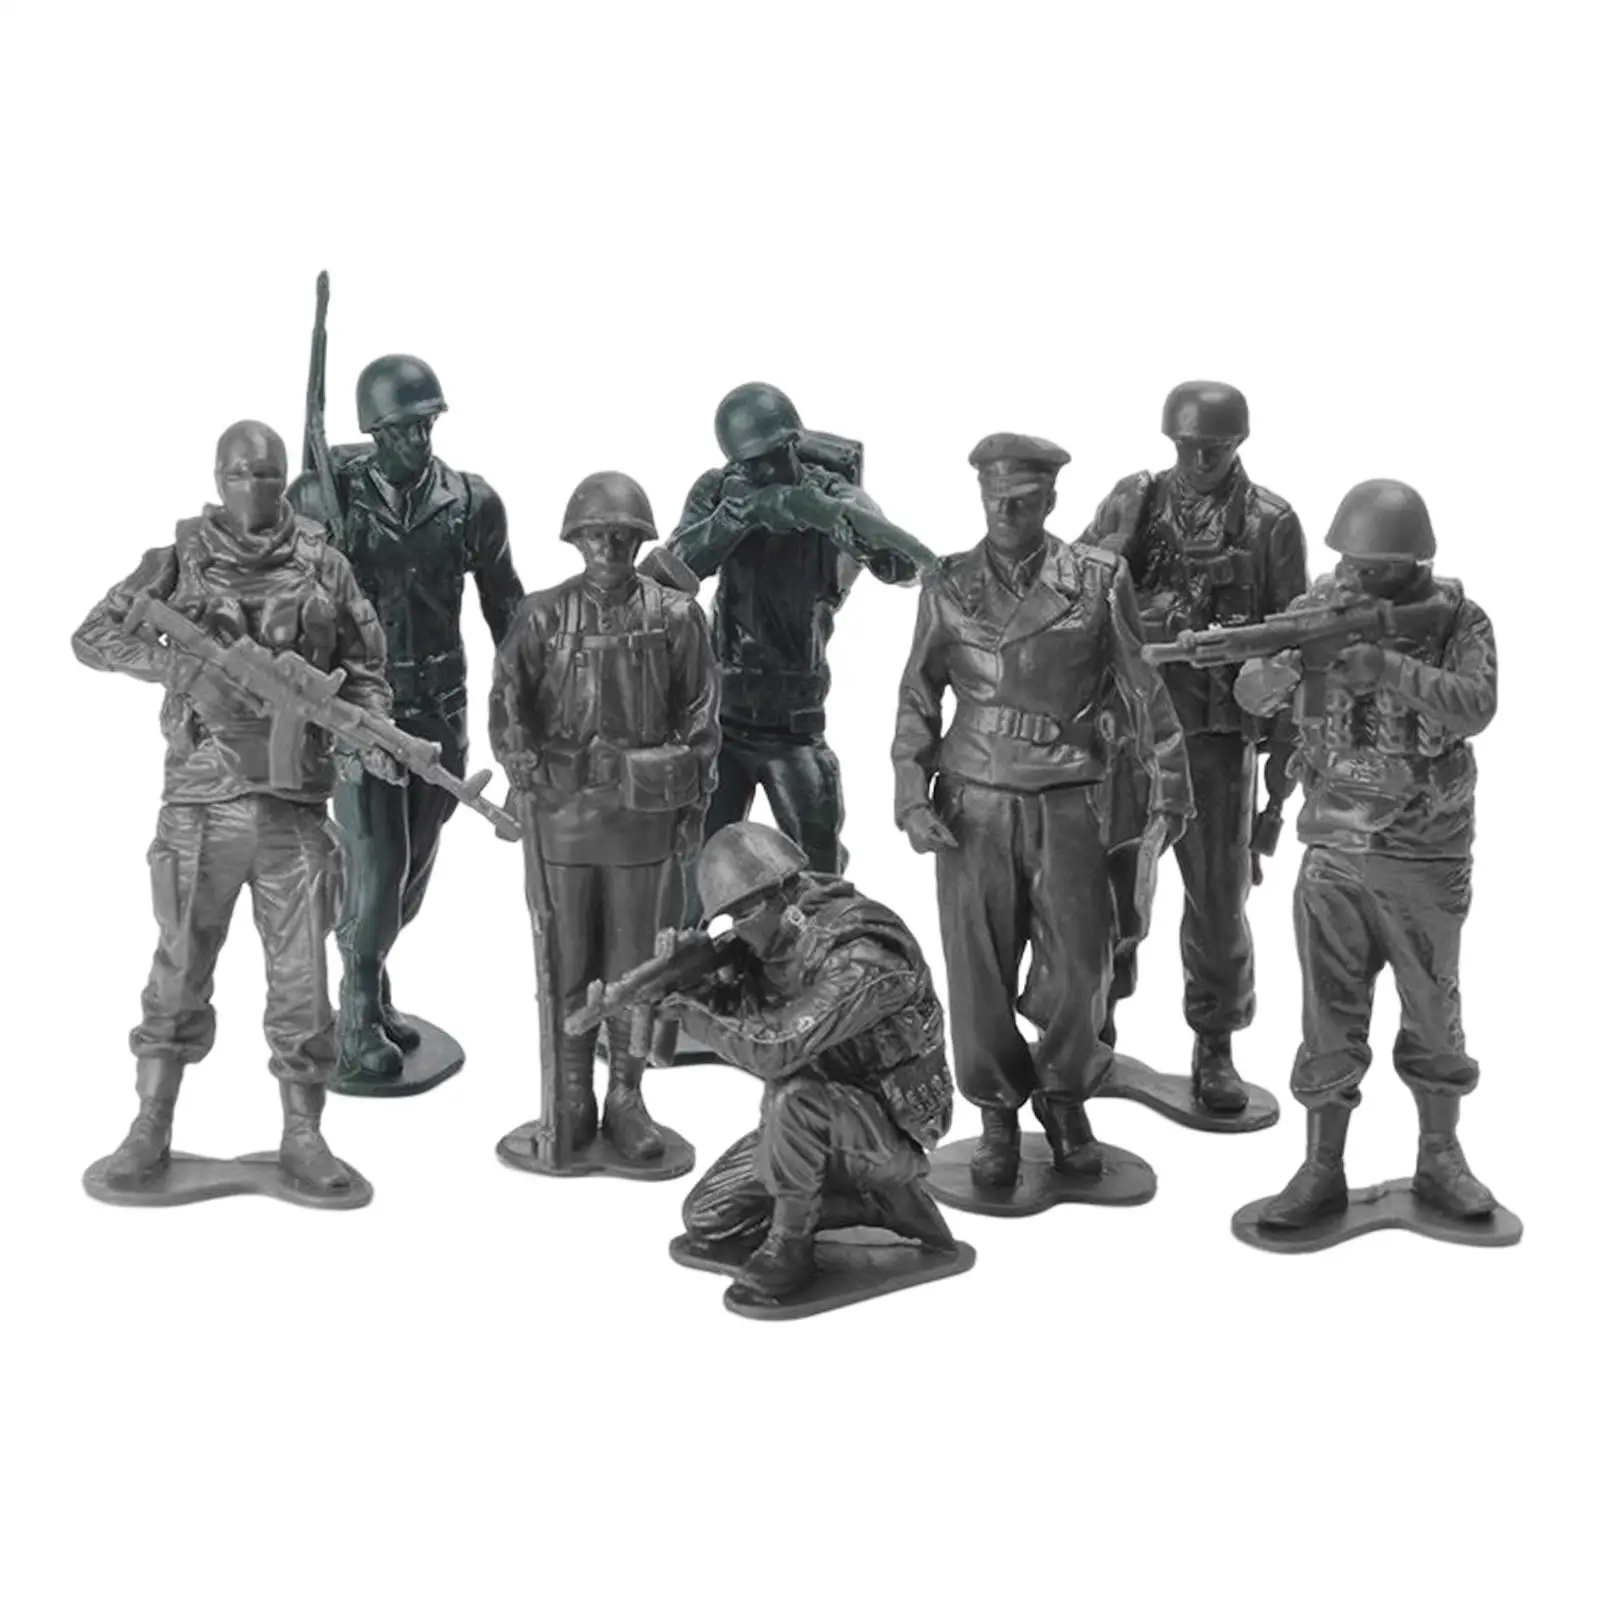 8Pcs Action Figure Toy Soldiers Playset Realistic Collection Toys Sand Table Decor Soldiers Figurines Model for Adults Teens